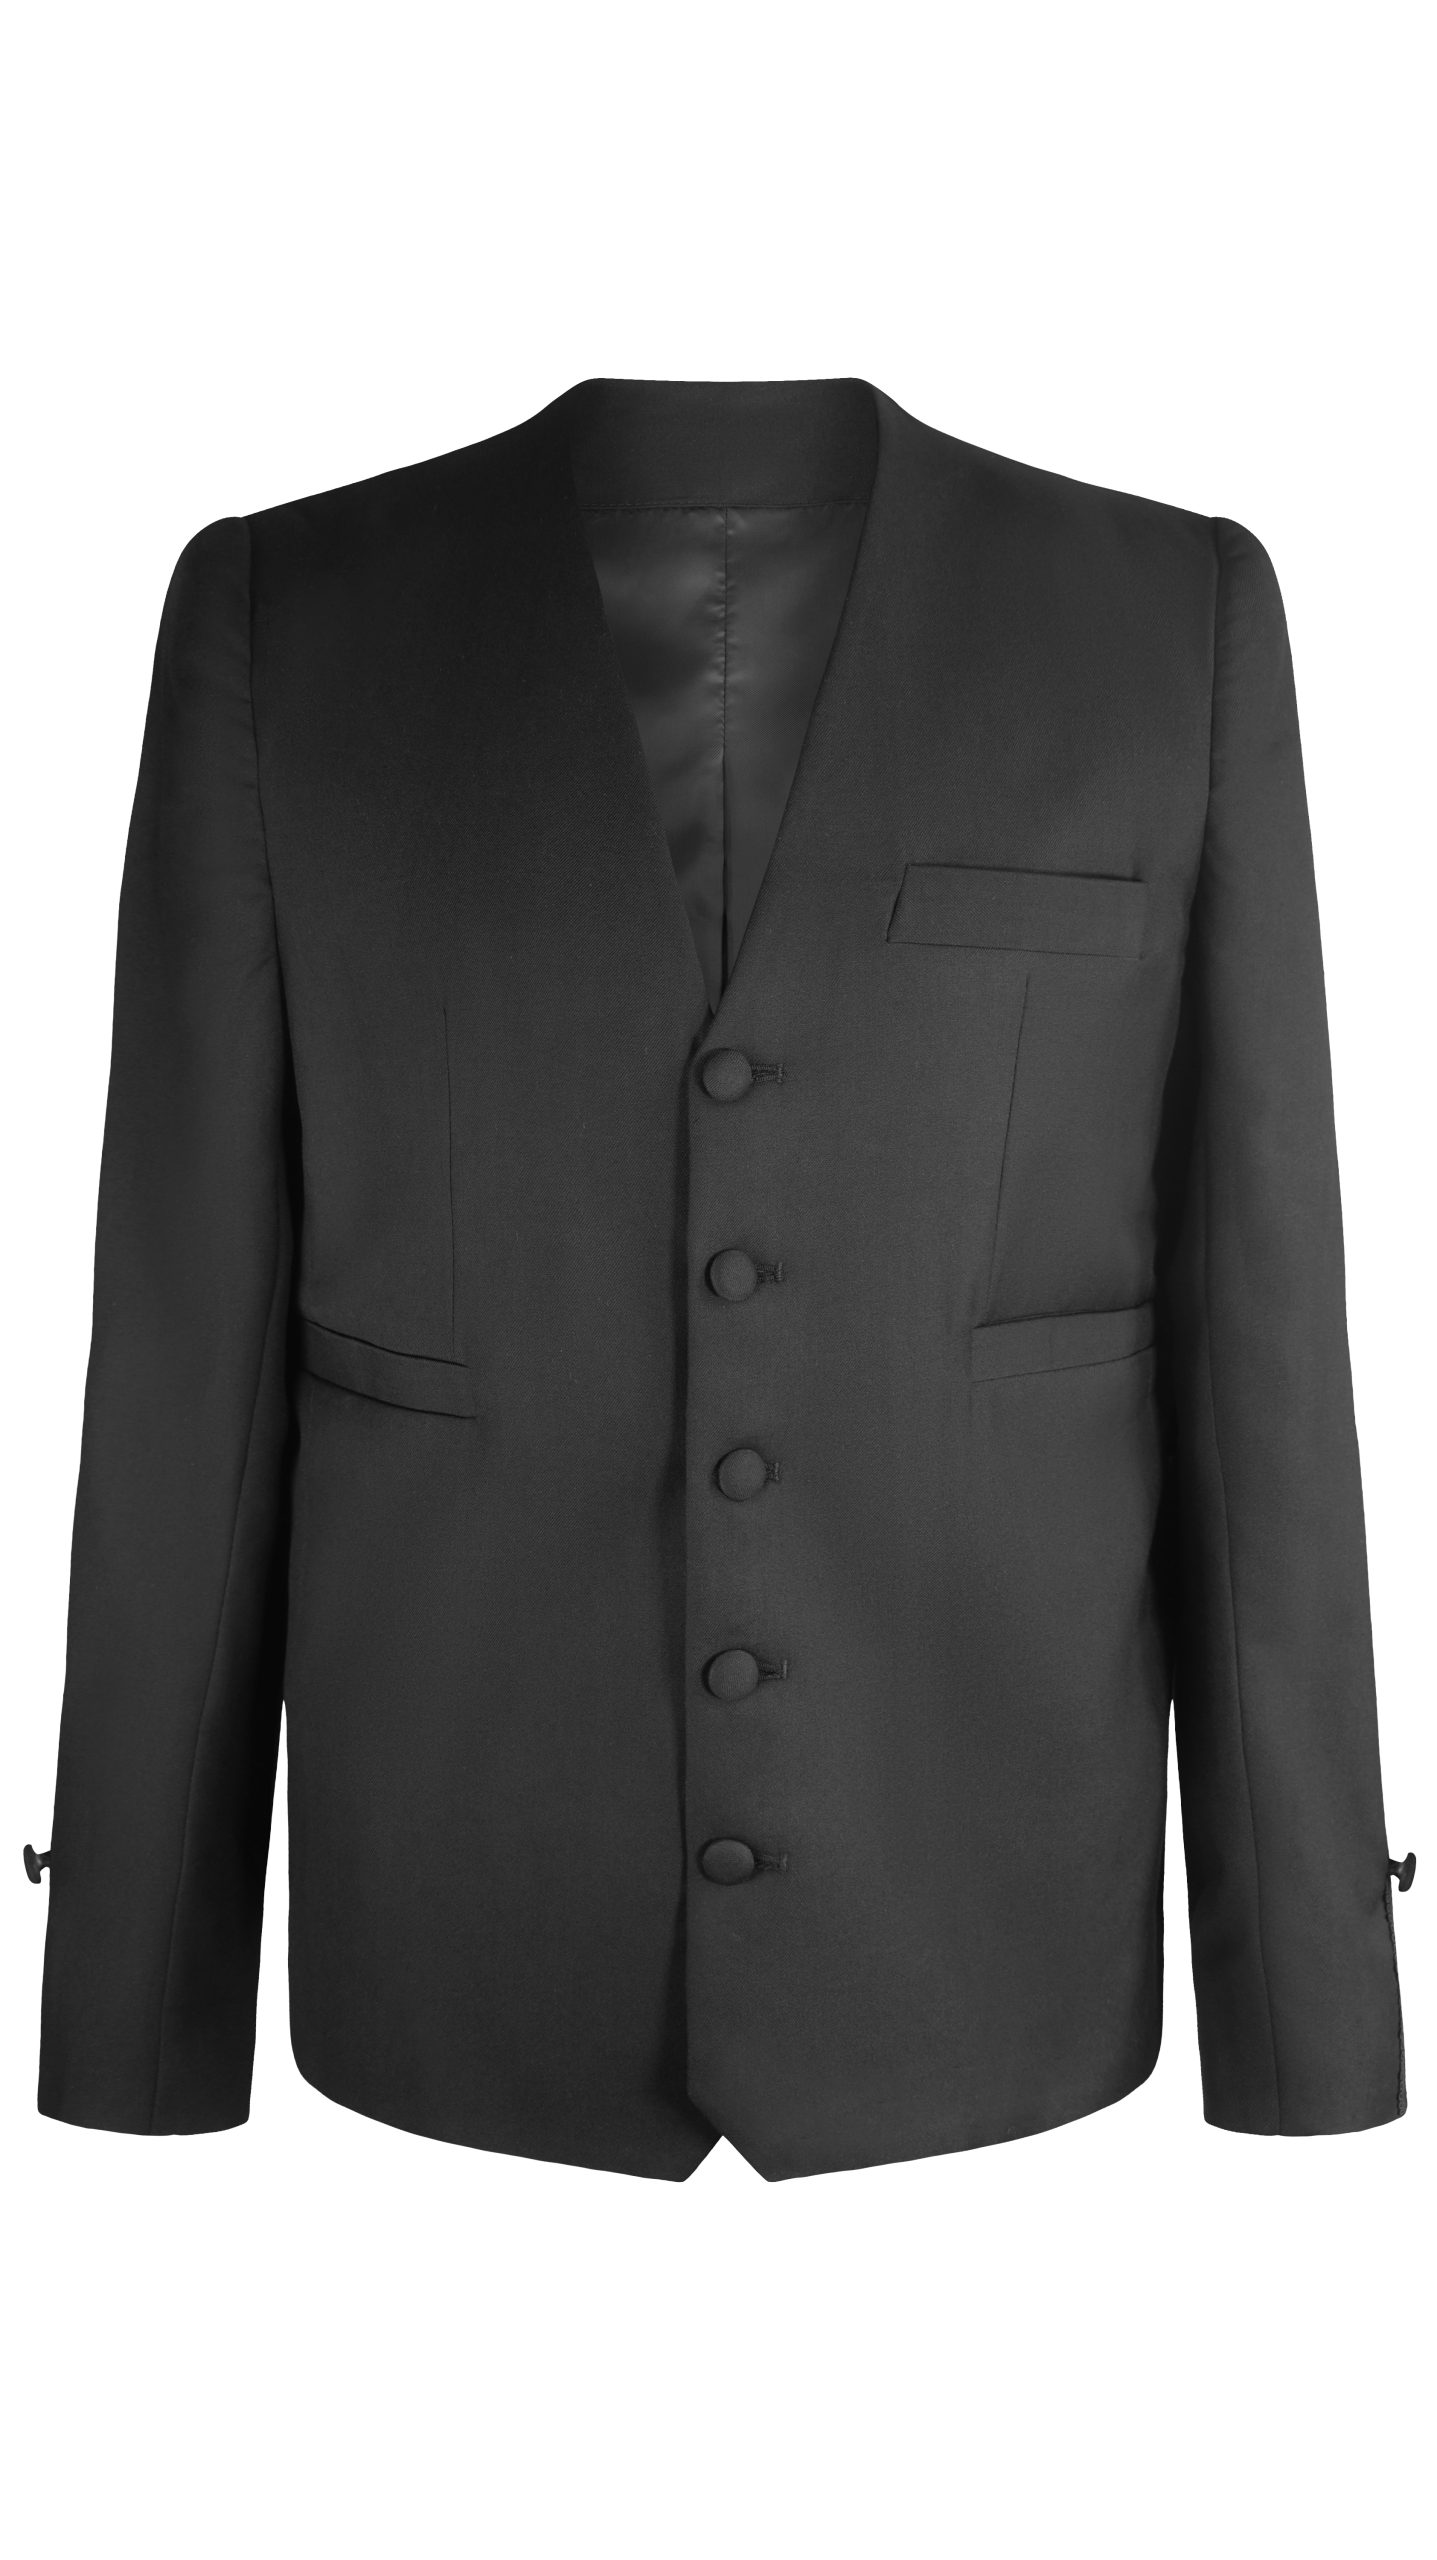 Barristers Jacket - Knights Legal Outfitters